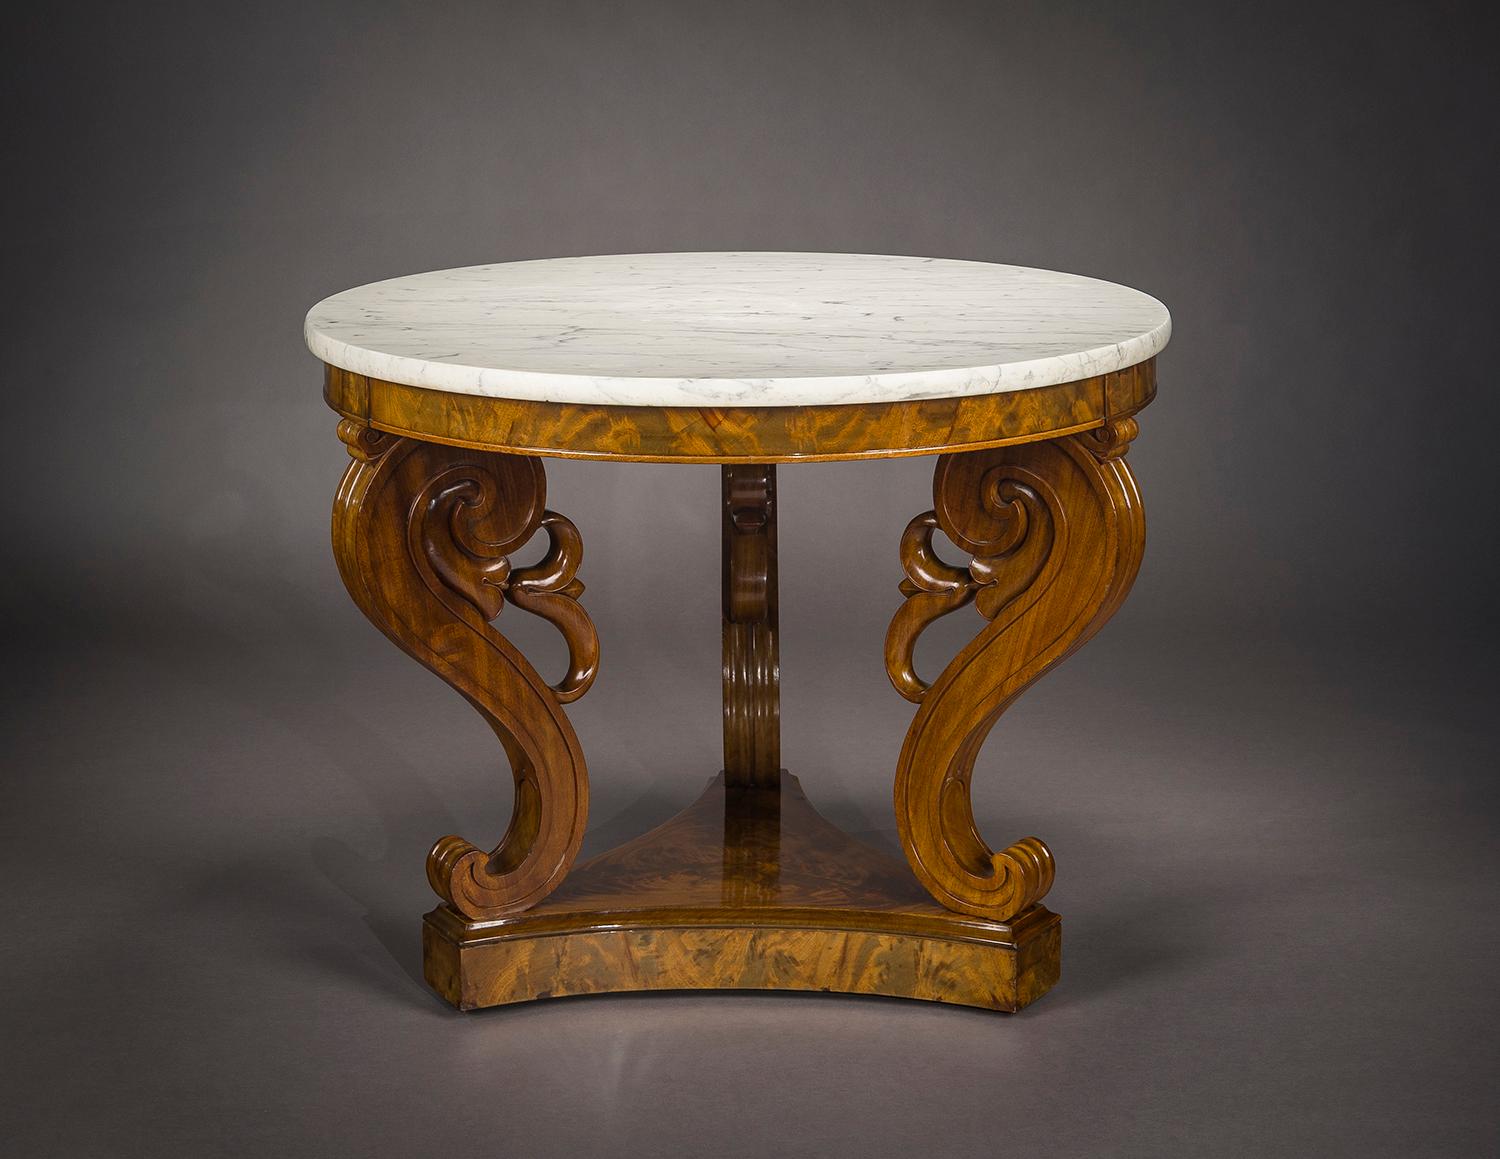 Boston, Massachusetts, circa 1825–1830.
Mahogany, with marble. 
Measures: 30 15/16 in. high x 39 15/16 in. diameter.

This center table is characteristic of Boston production in the period 1825-1830. Reliant upon beautifully figured mahogany